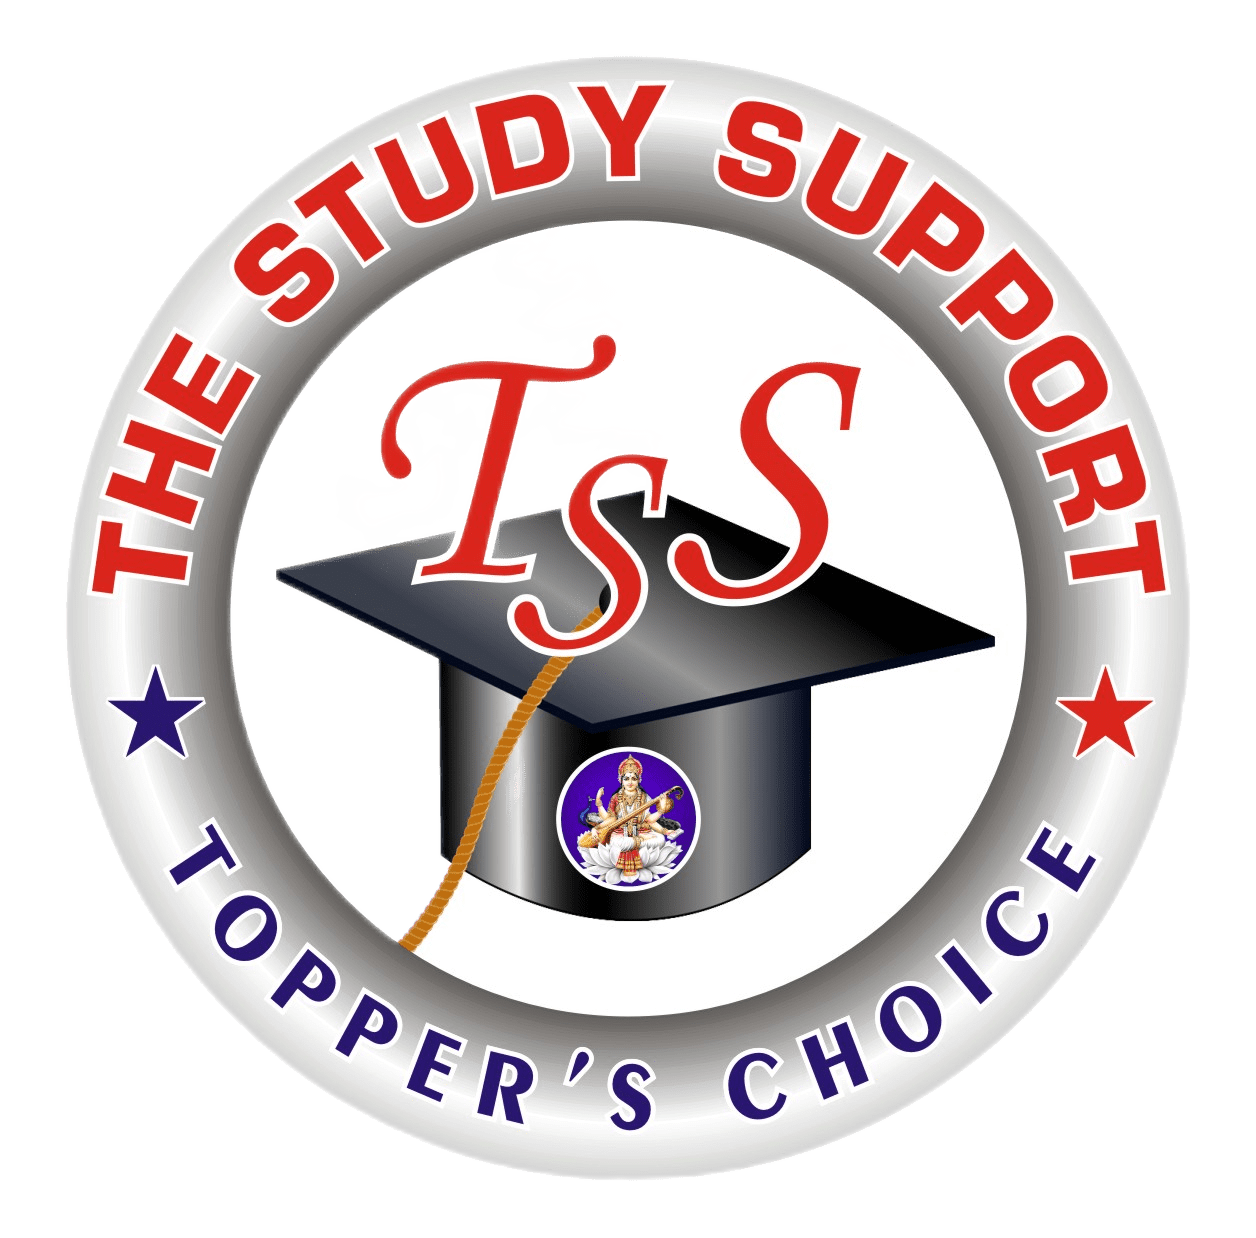 The Study Support